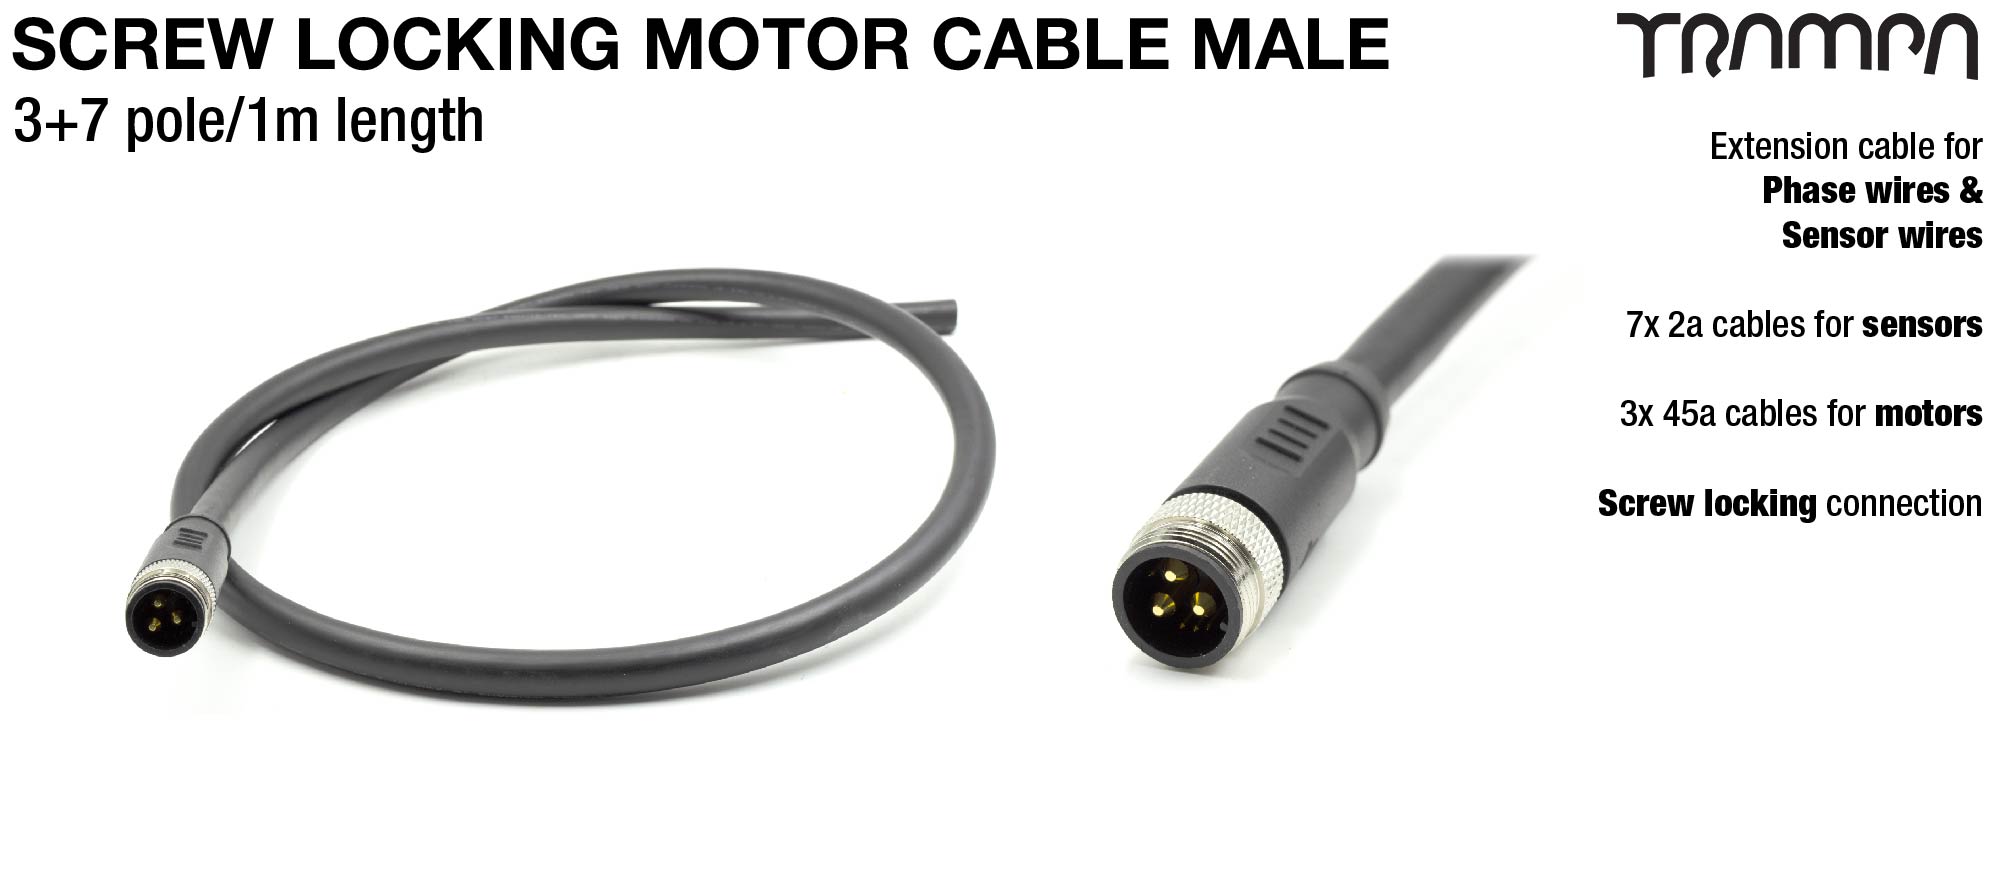 Screw locking motor cable male